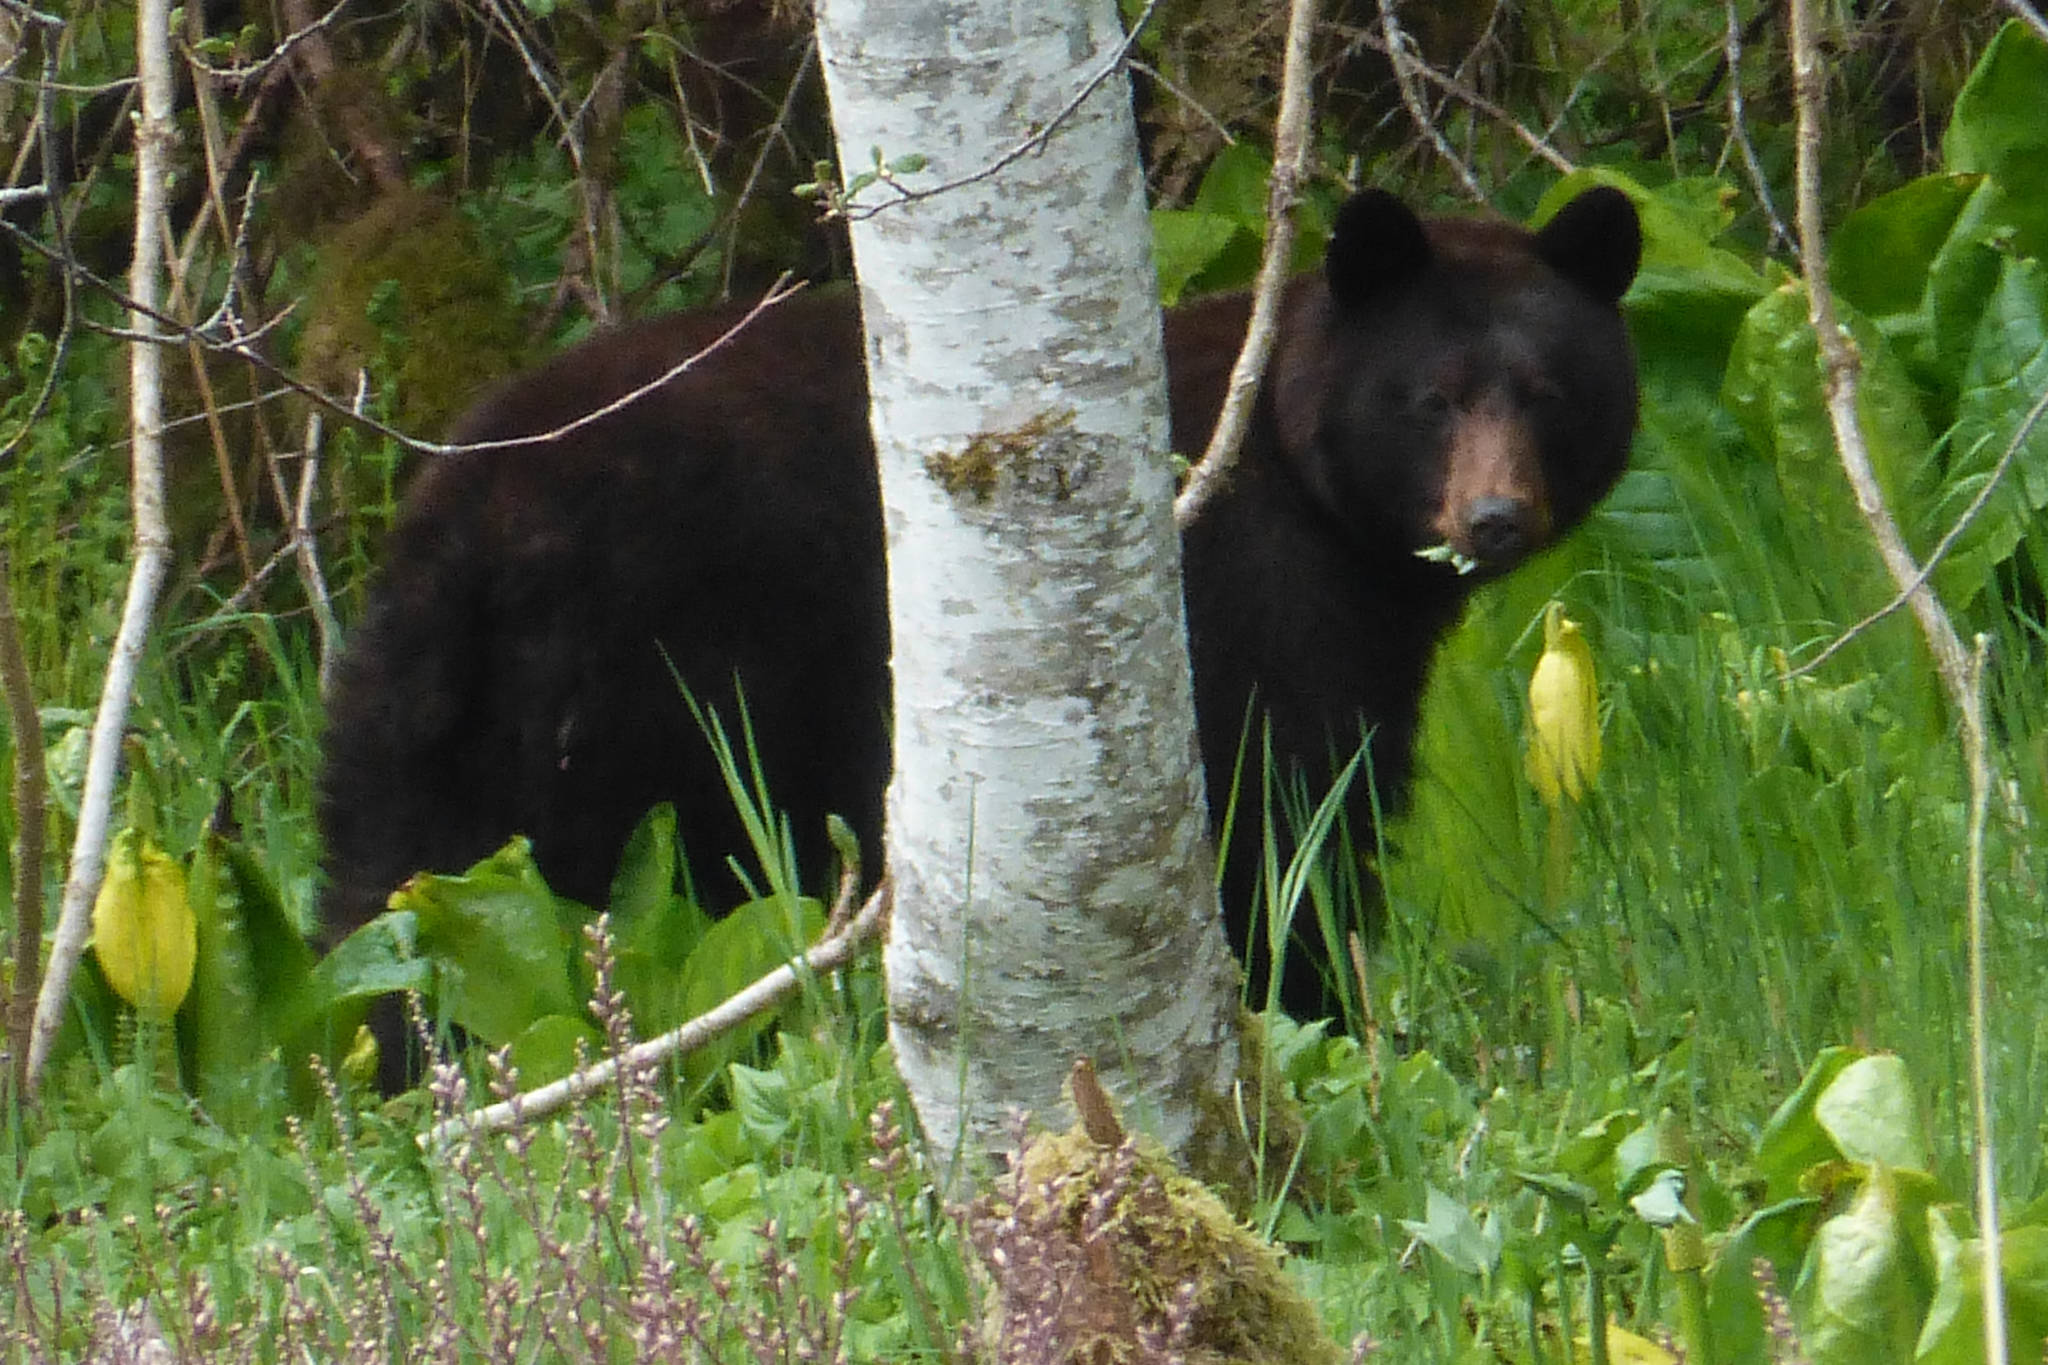 Black bear: “I don’t think they can see me.” Spotted on May 17 at Pt. Bridget State Park. (Photo by Denise Carroll)